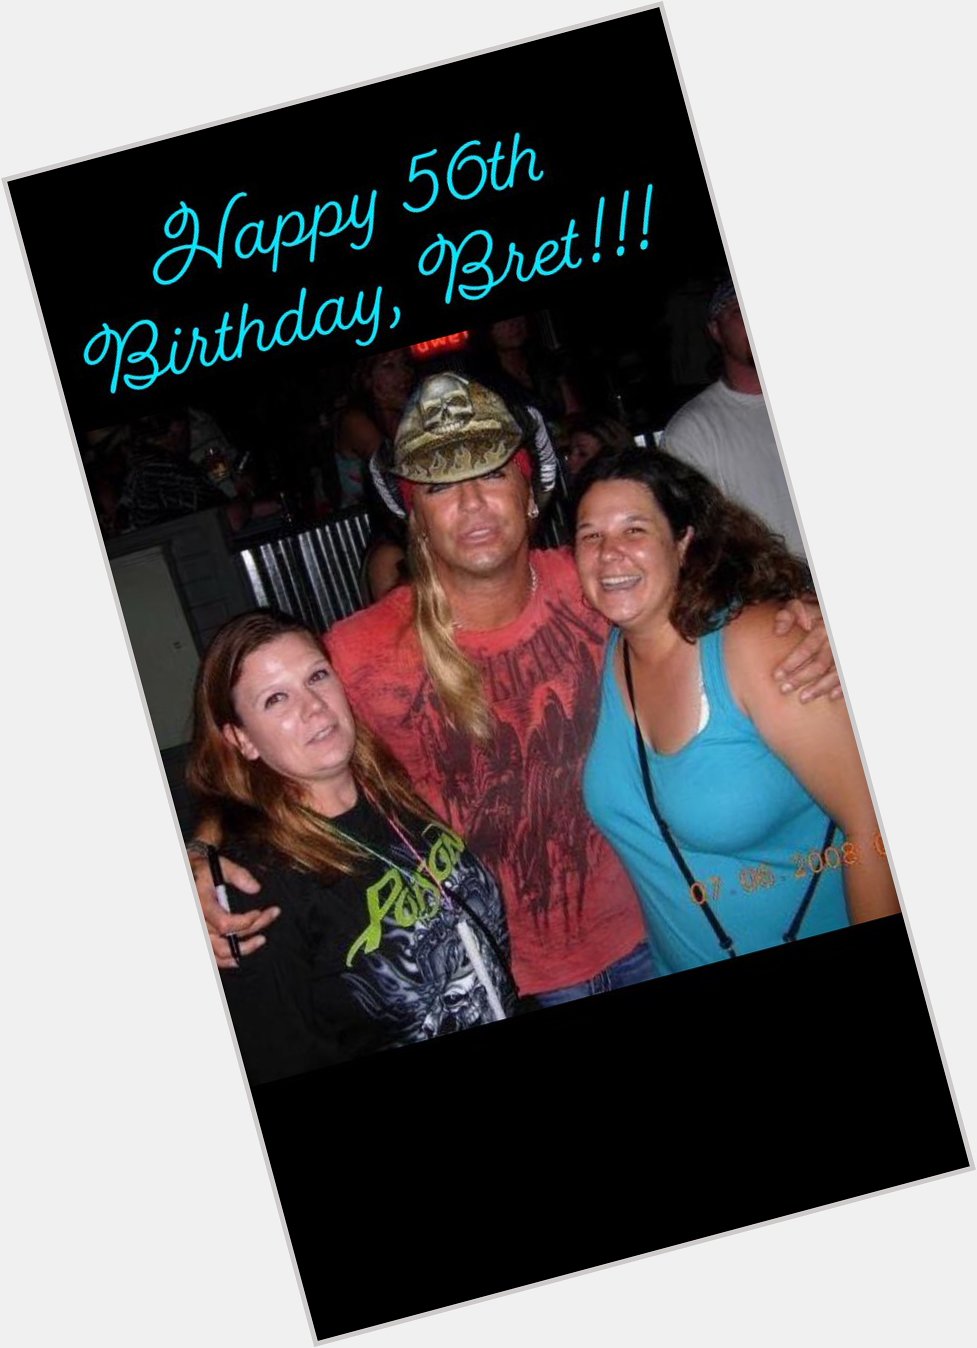 Happy Birthday to the legendary Bret Michaels!!! Hope it s a great one 